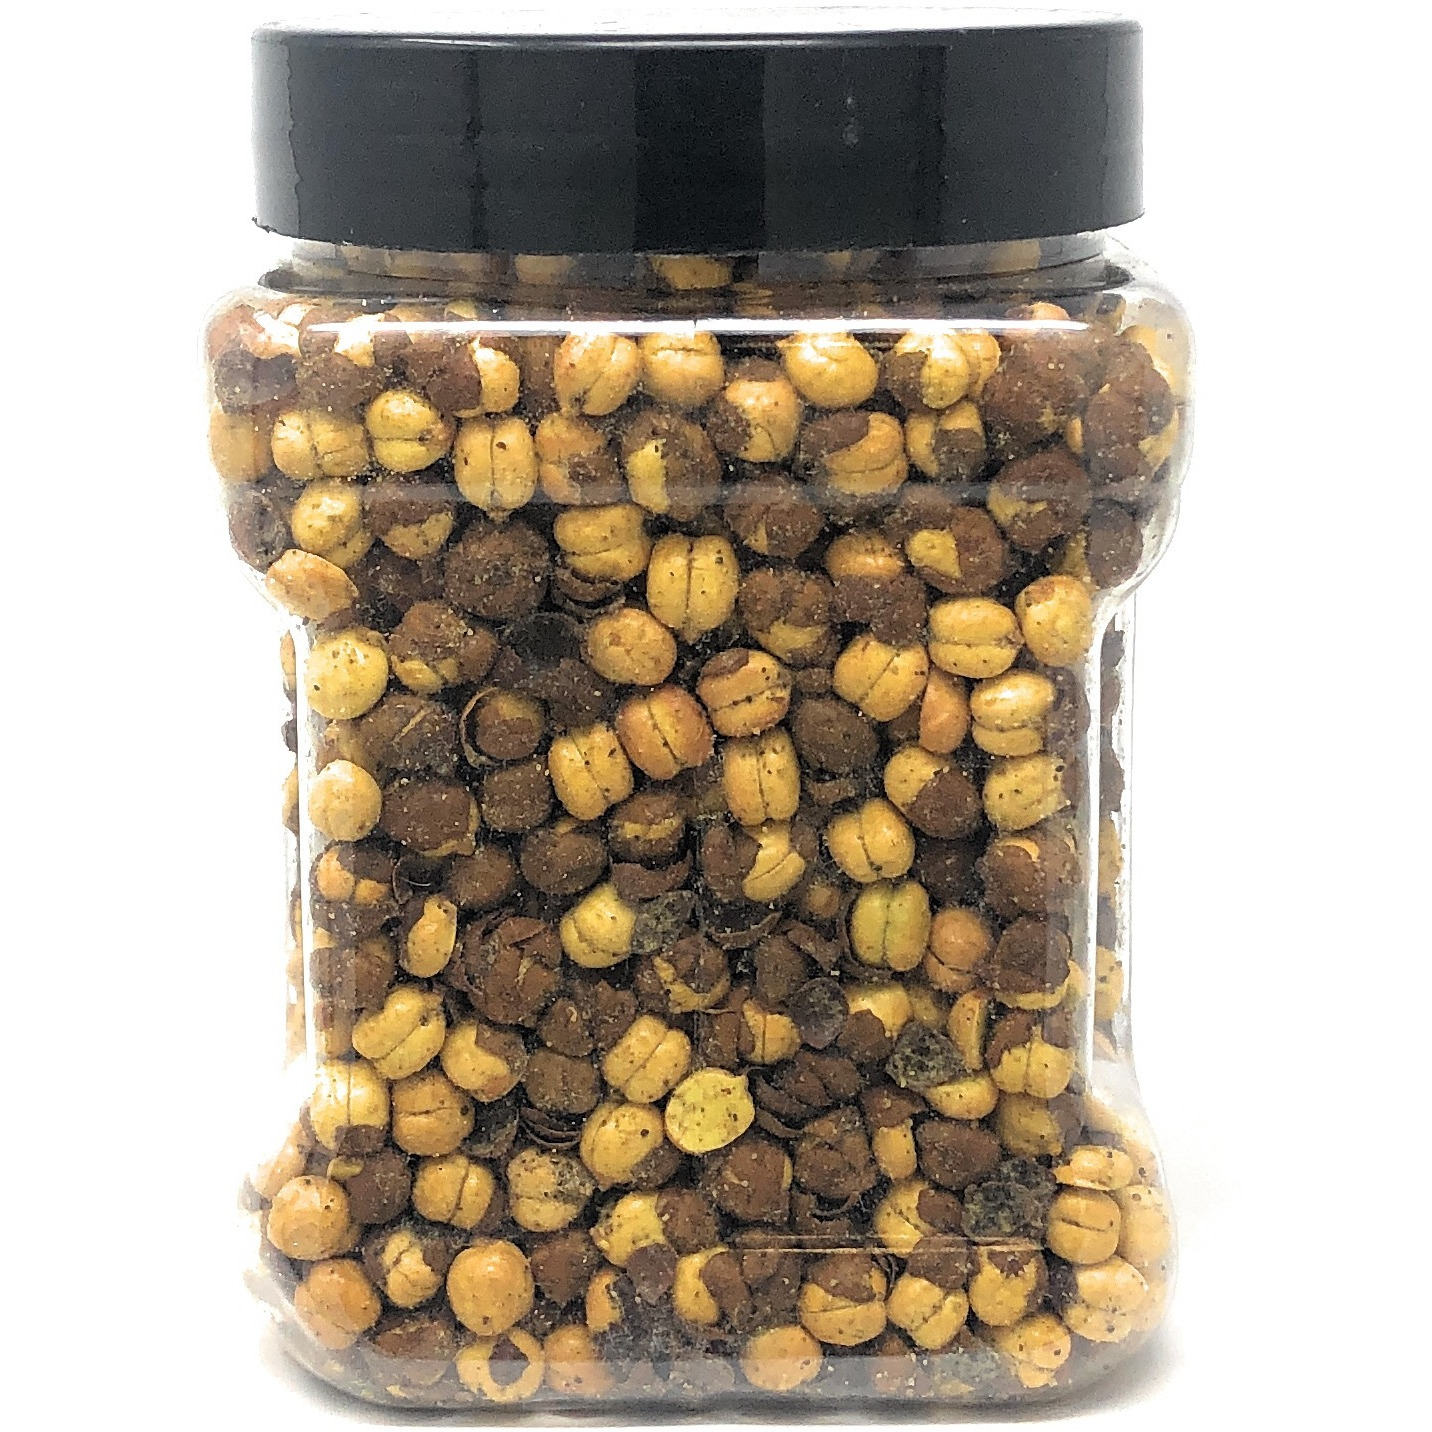 Rani Roasted Chana (Chickpeas) Black Pepper Flavor 14oz (400g) ~ All Natural | Vegan | No Preservatives | No Colors | Great Snack, Ready to Eat, Seasoned with 5 Spices, Indian Origin